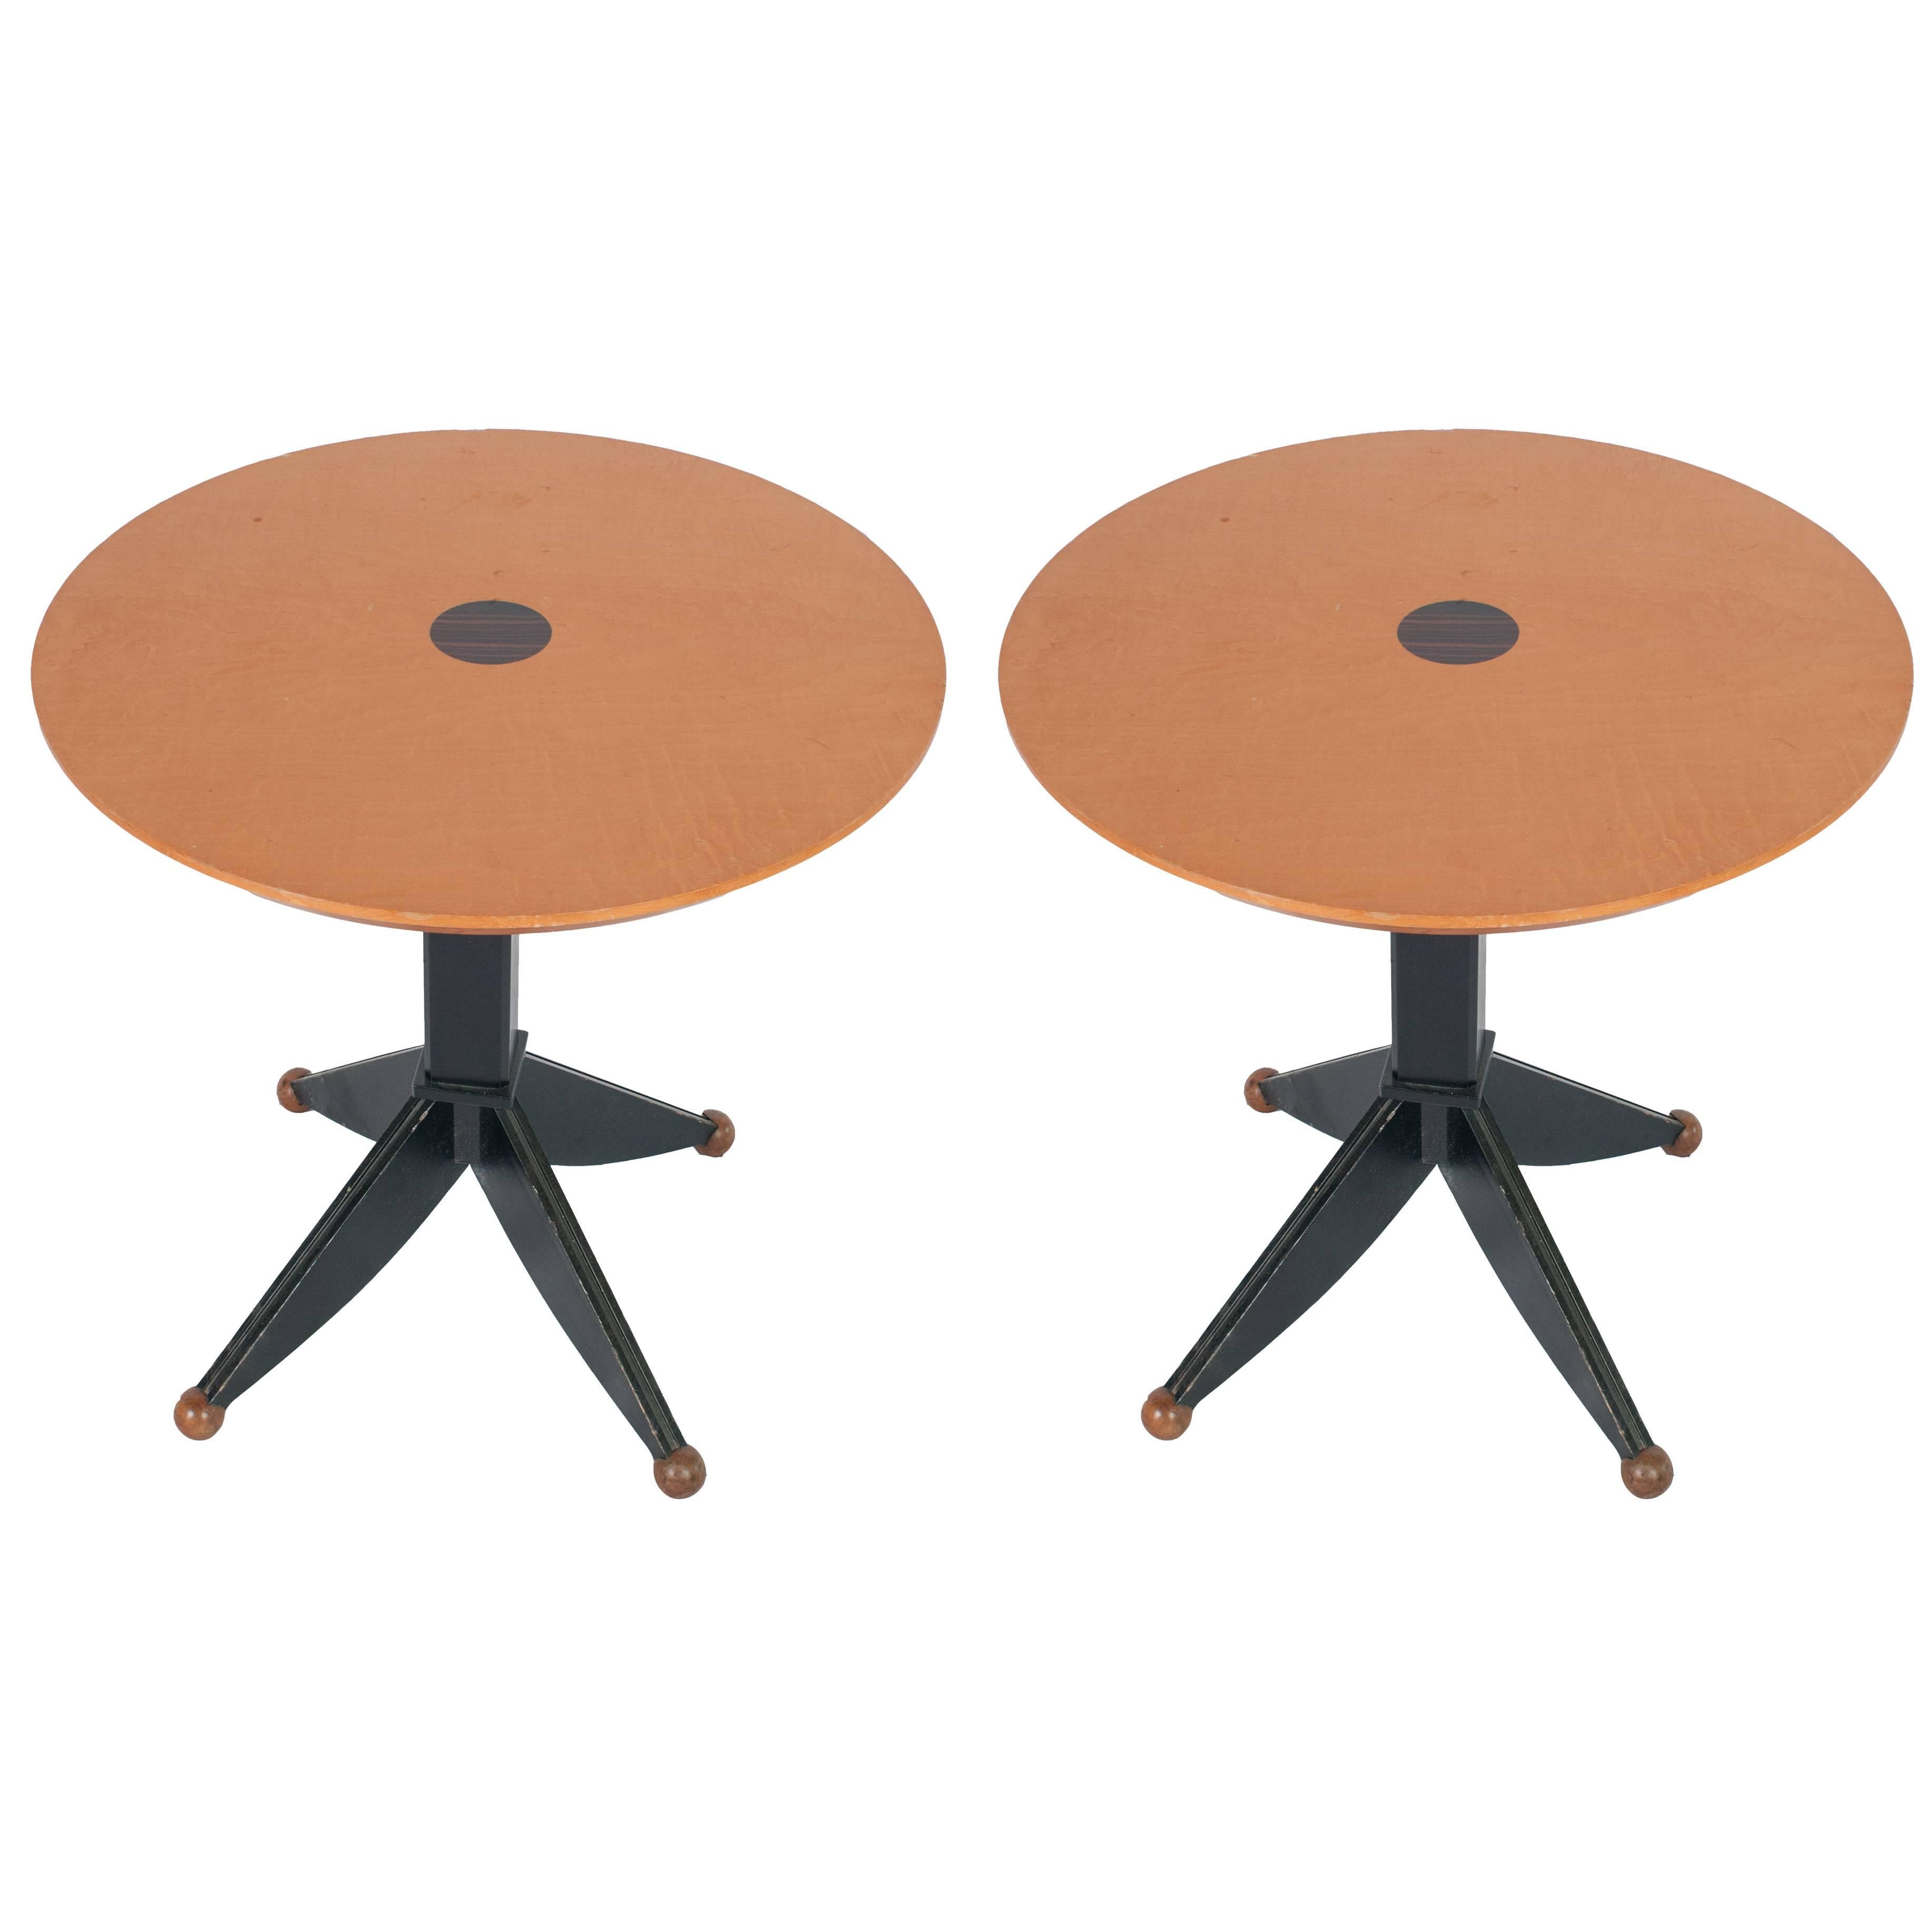 A Set of Painted Gueridon Tables Sold Individually